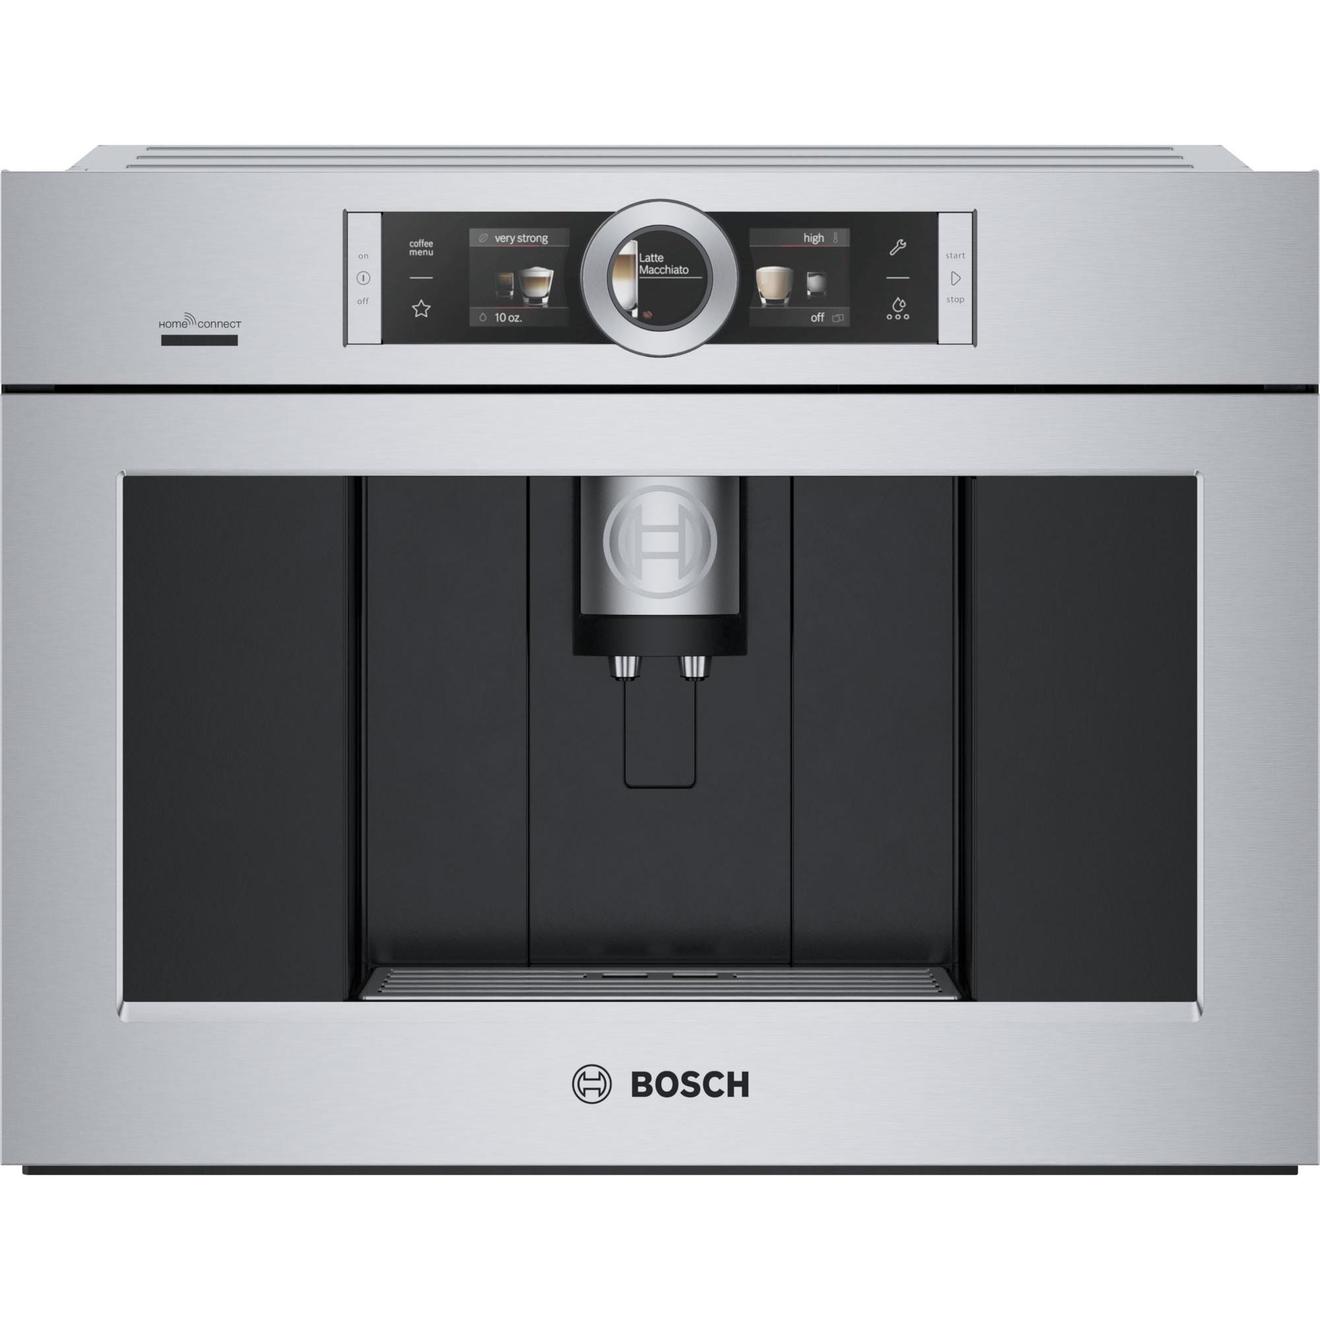 Bosch Built-in Coffee Machine with Tank offers at $4799.98 in Trail Appliances